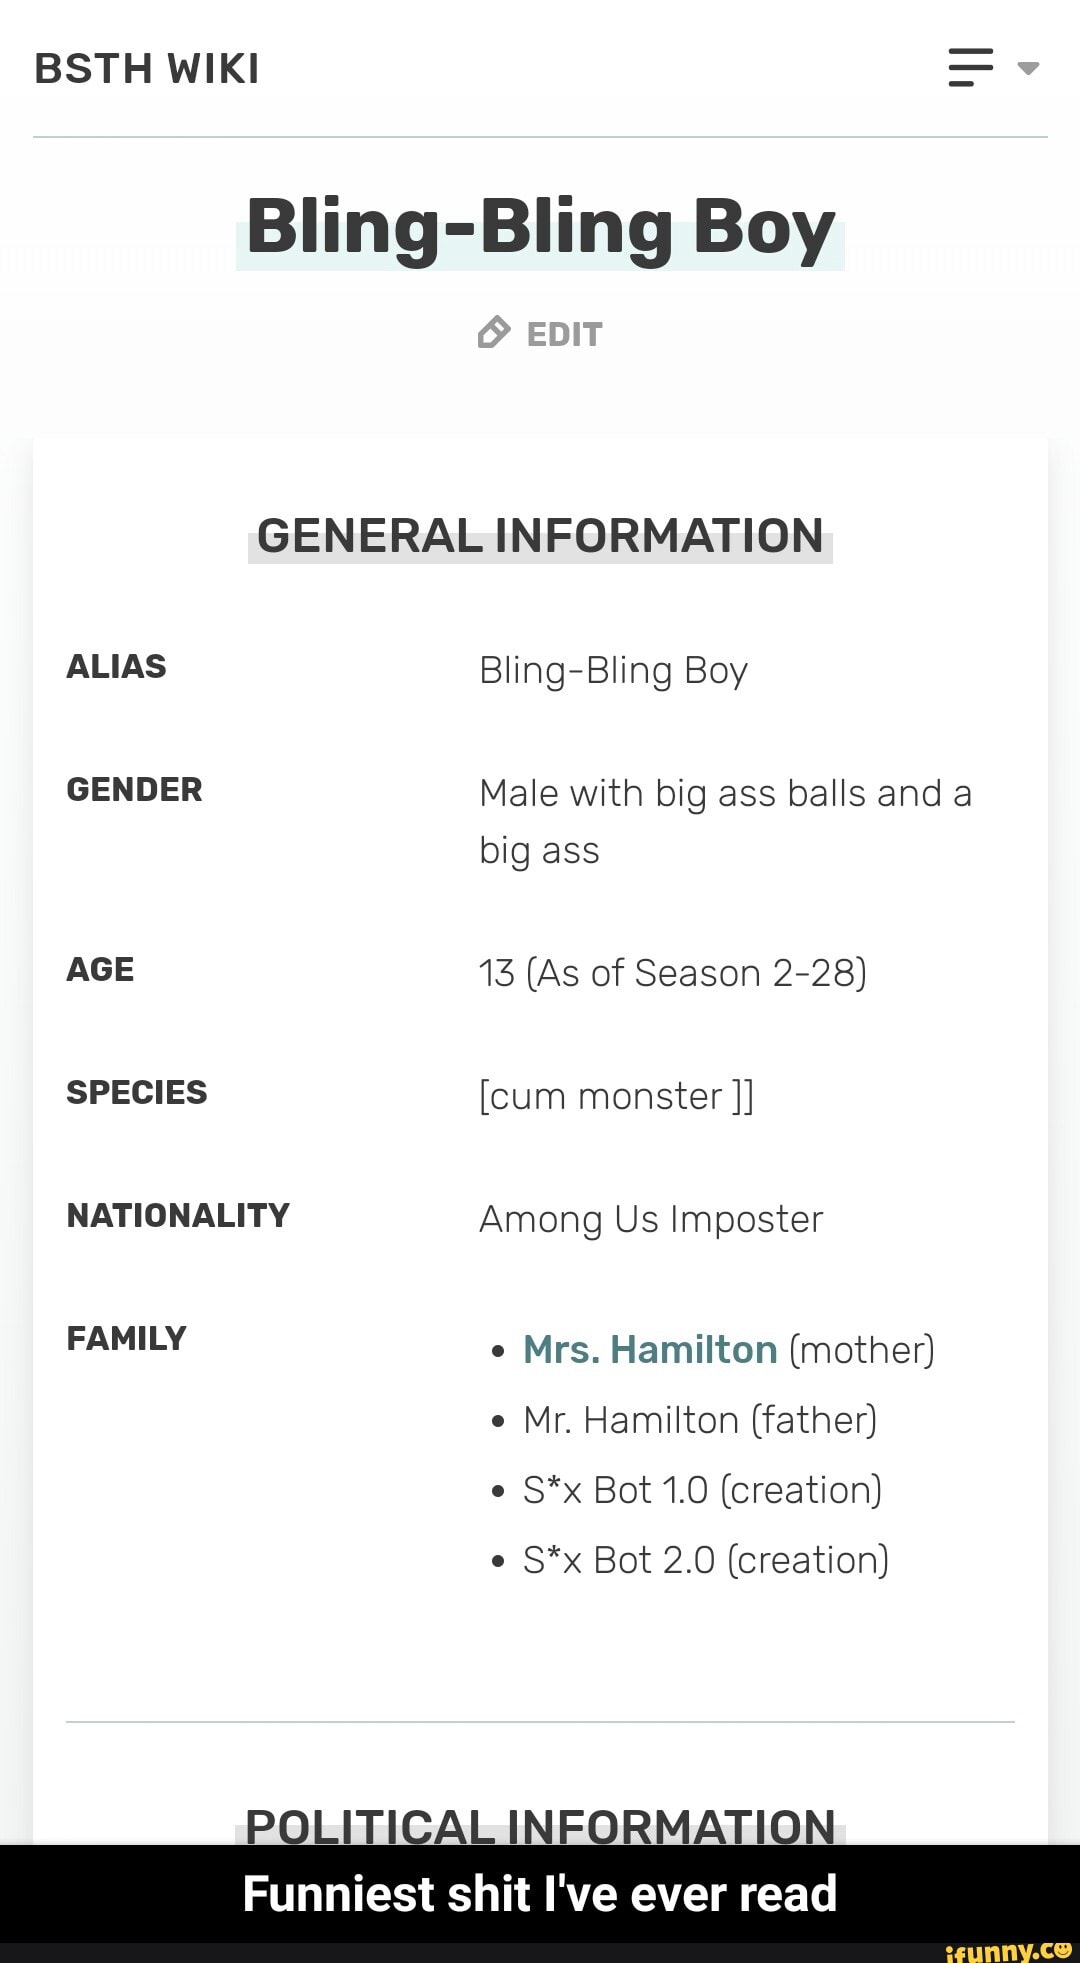 BSTH WIKI Bling-Bling Boy GENERAL INFORMATION ALIAS Bling-Bling Boy GENDER  Male with big ass